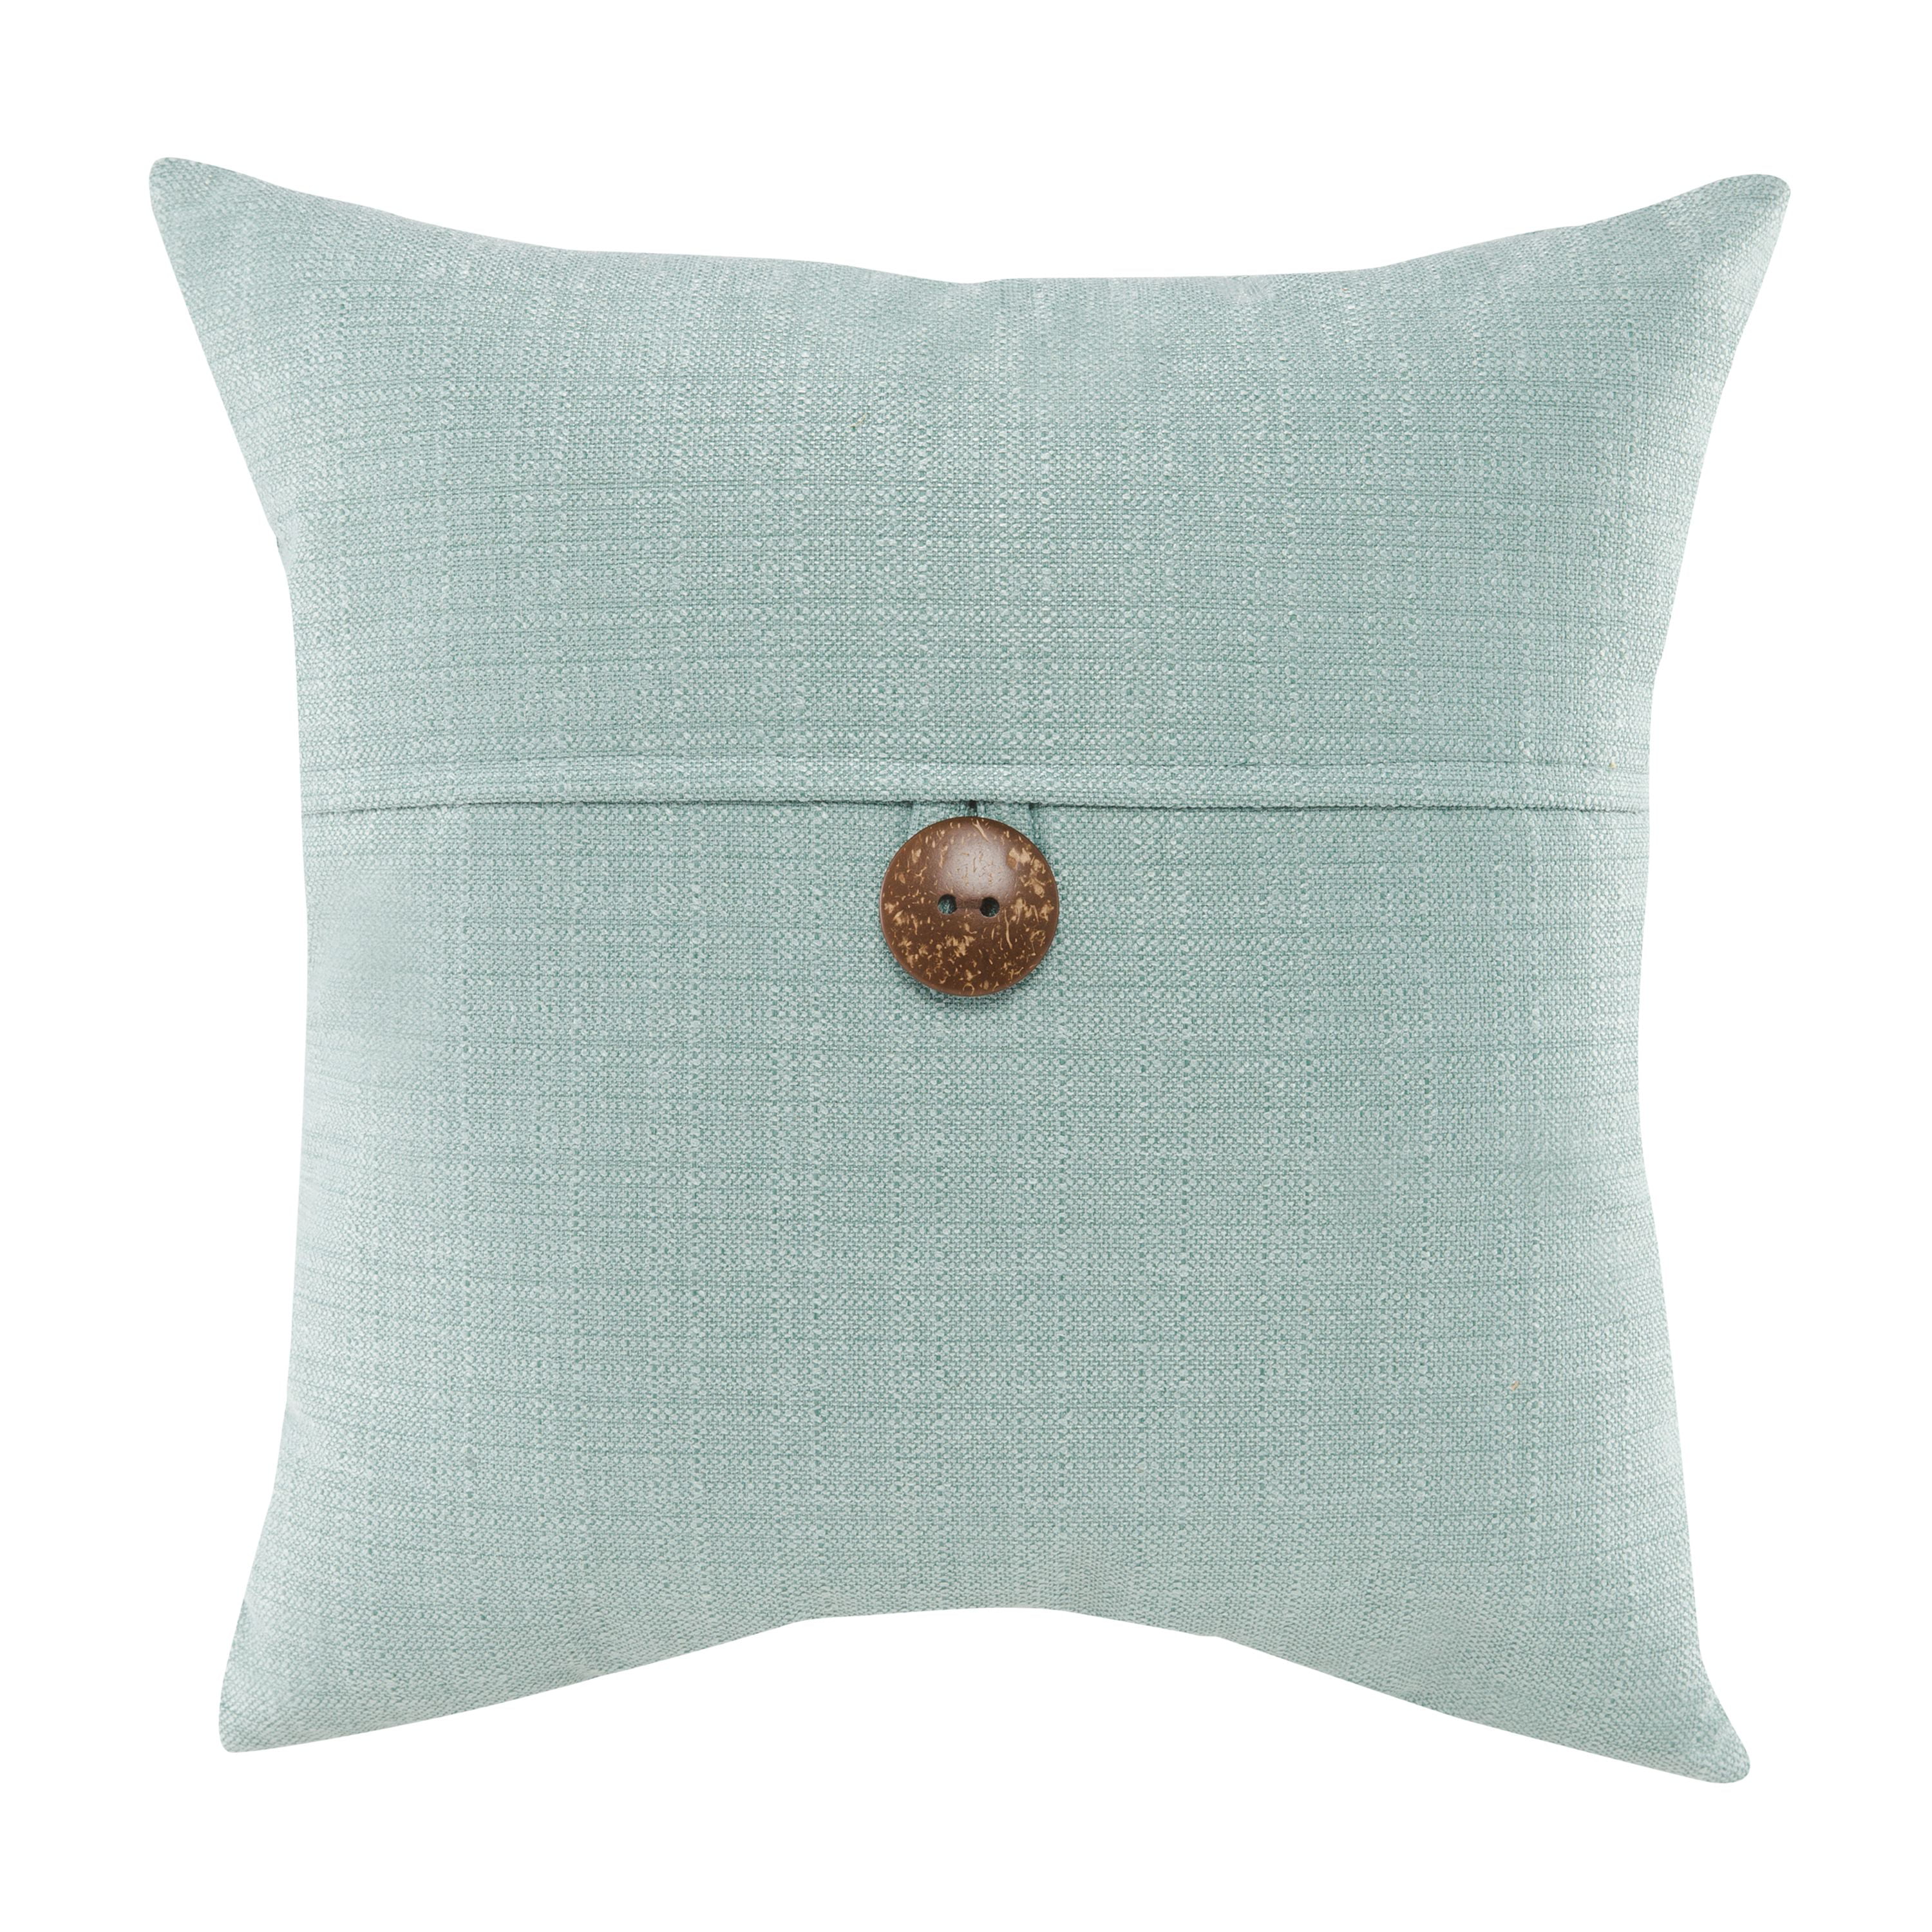 Mainstays Dynasty Square Coconut Button Accent Decorative Throw Pillow ...